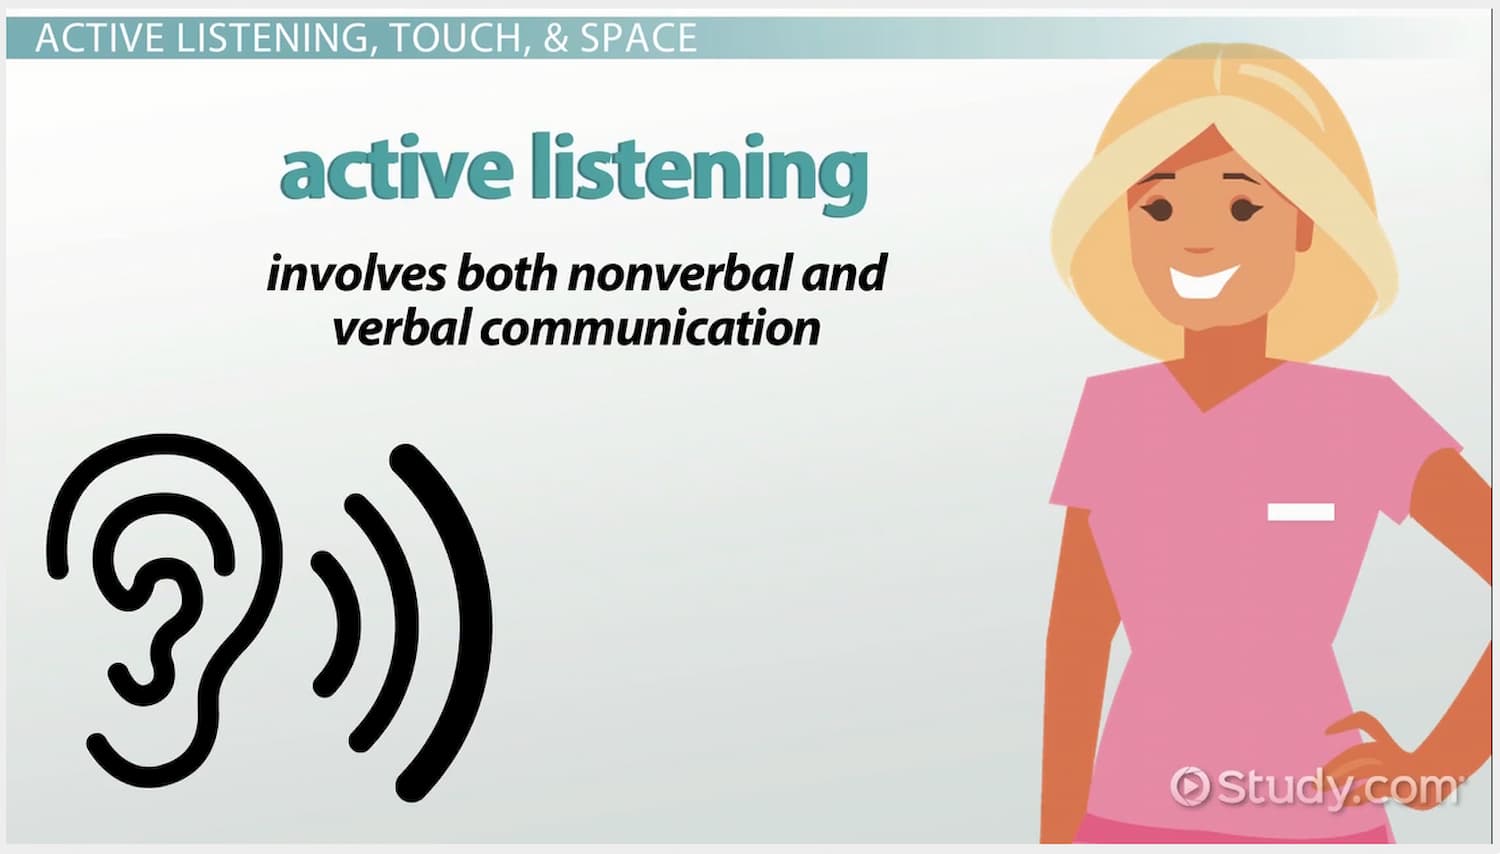 How does active listening help with therapeutic communication?